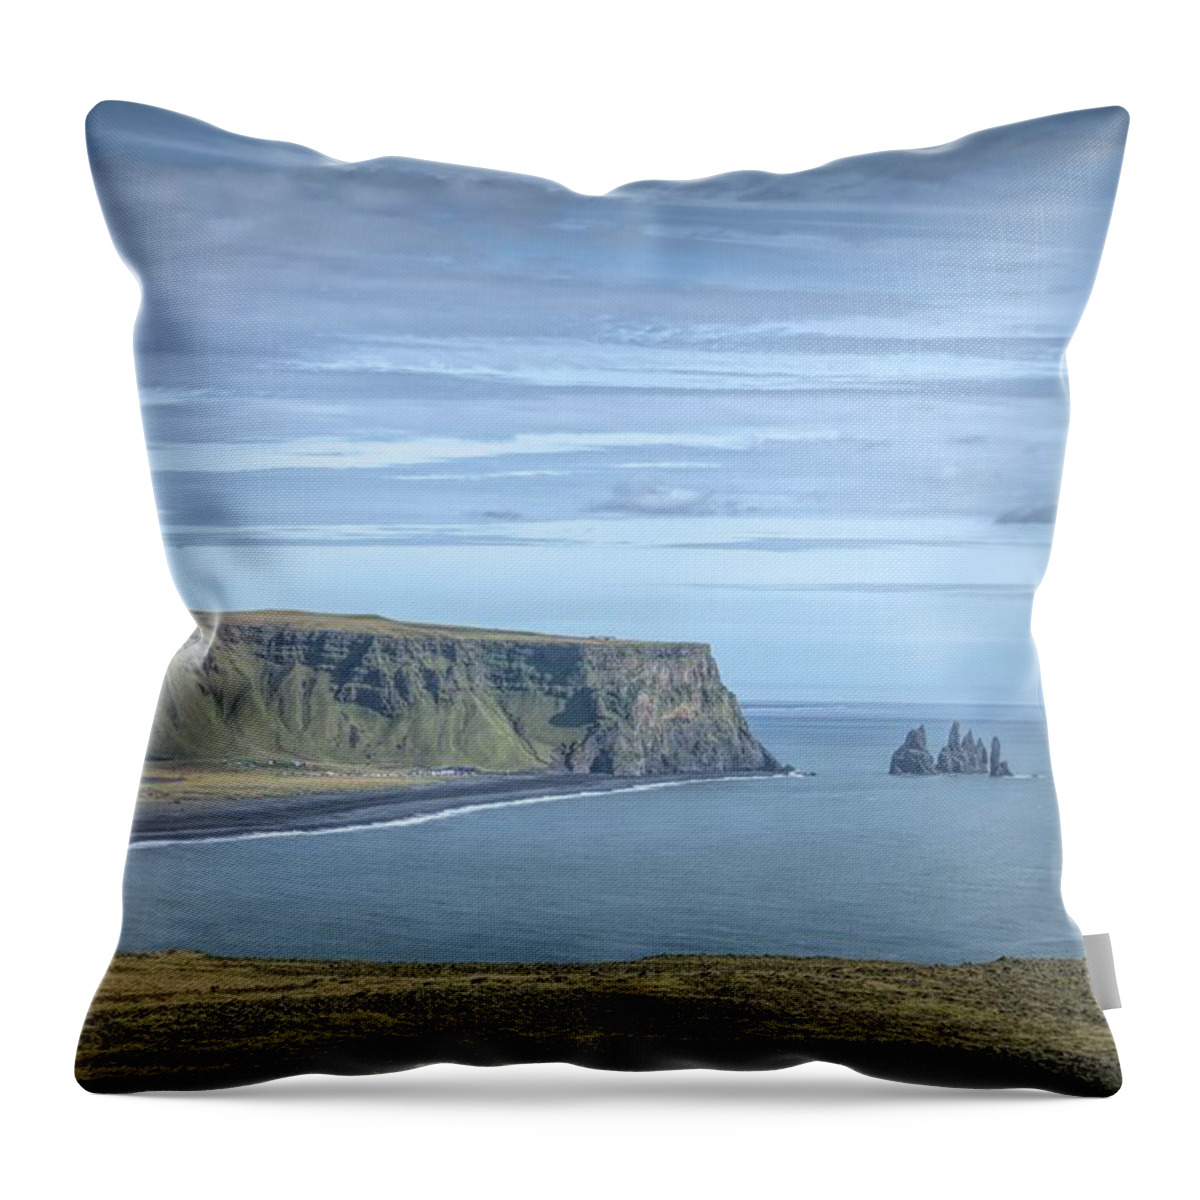 Nordic Throw Pillow featuring the photograph Nordic Landscape by Jim Cook